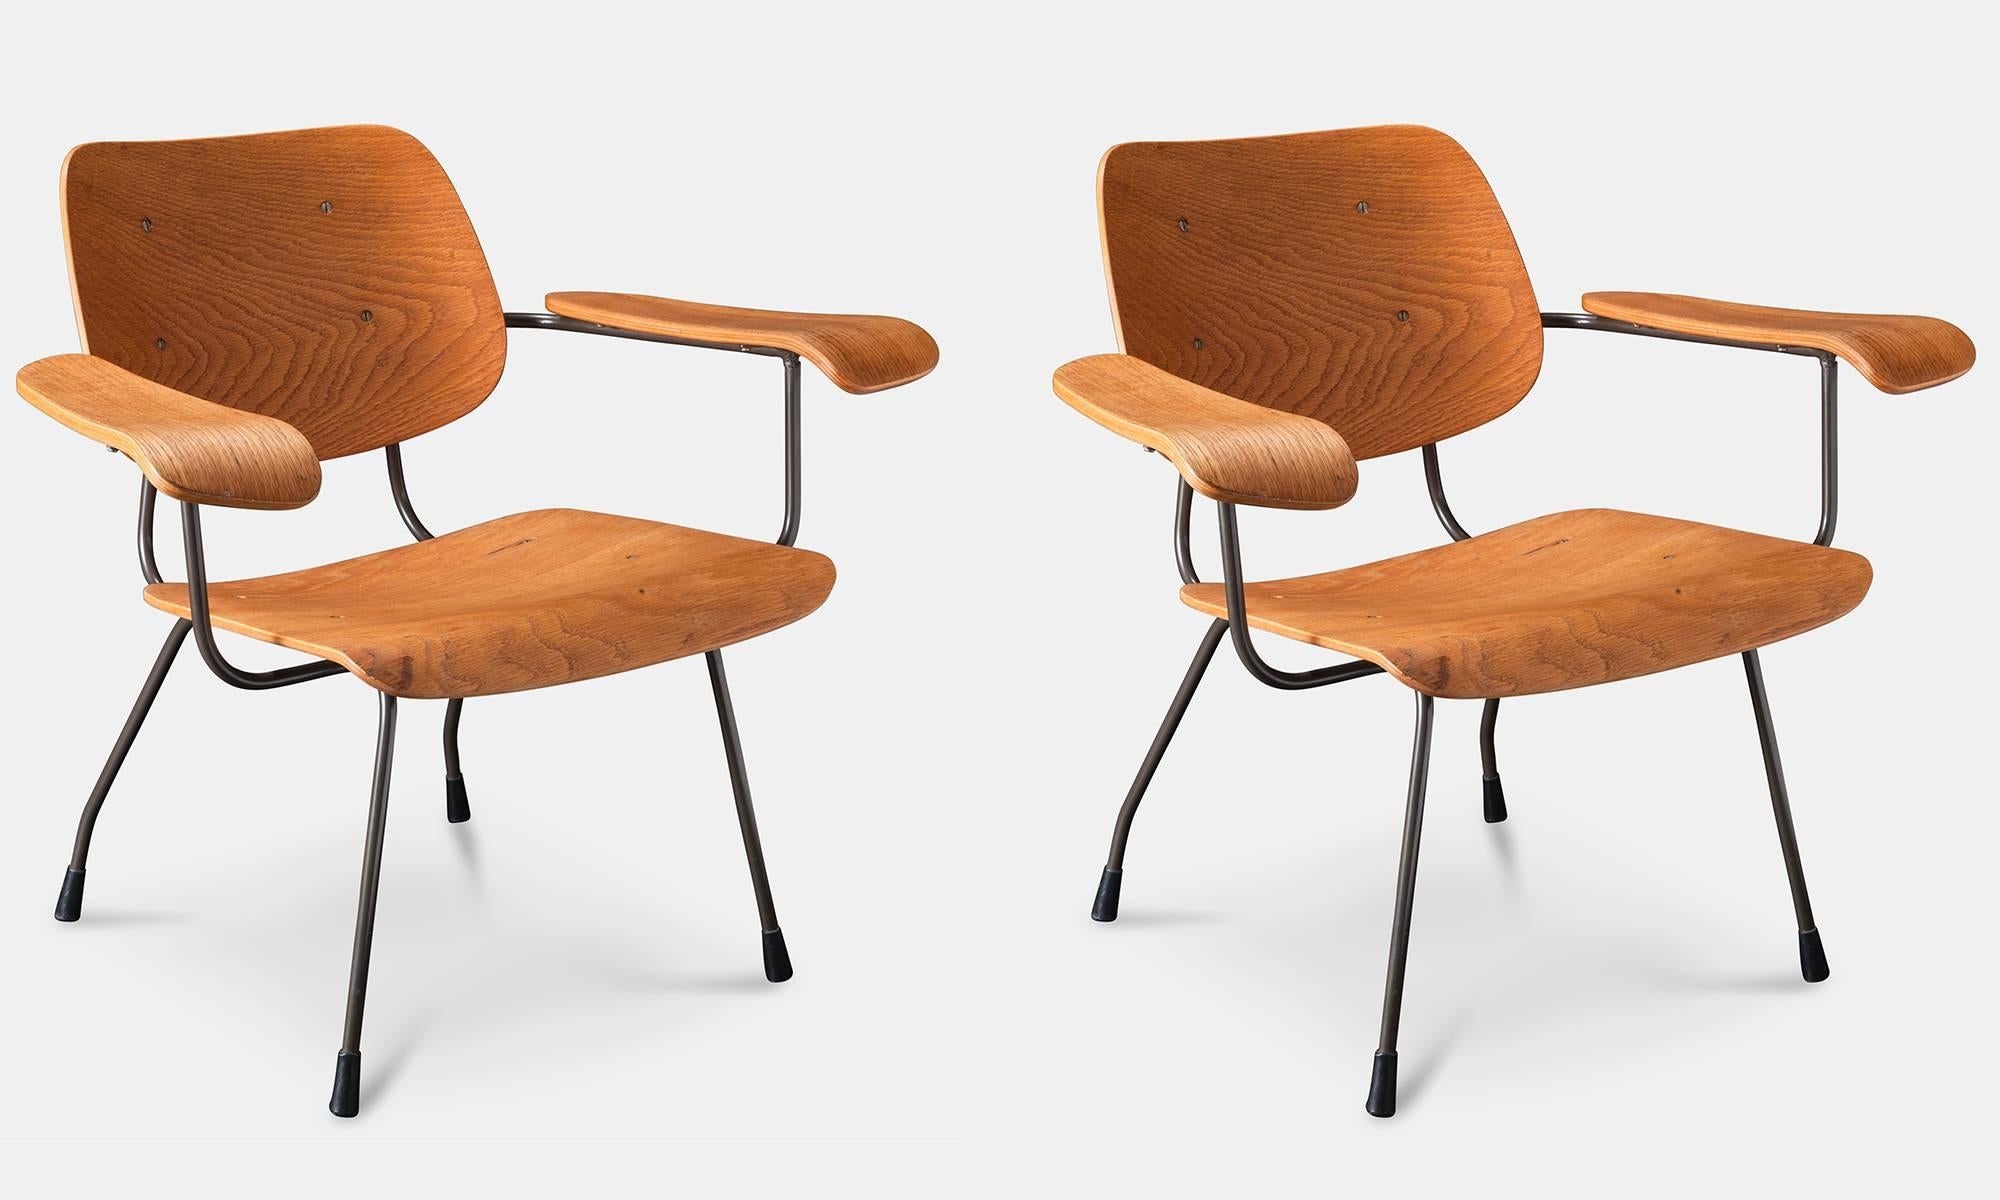 Pair of Tjerk Reijenga Model 8000 Lounge Chairs, Netherlands, circa 1962

Model 8000 lounge chairs, with teak plywood seat and back, supported by brown lacquered metal frame. 

Designed by Tjerk Reijenga for Pilastro in 1962.